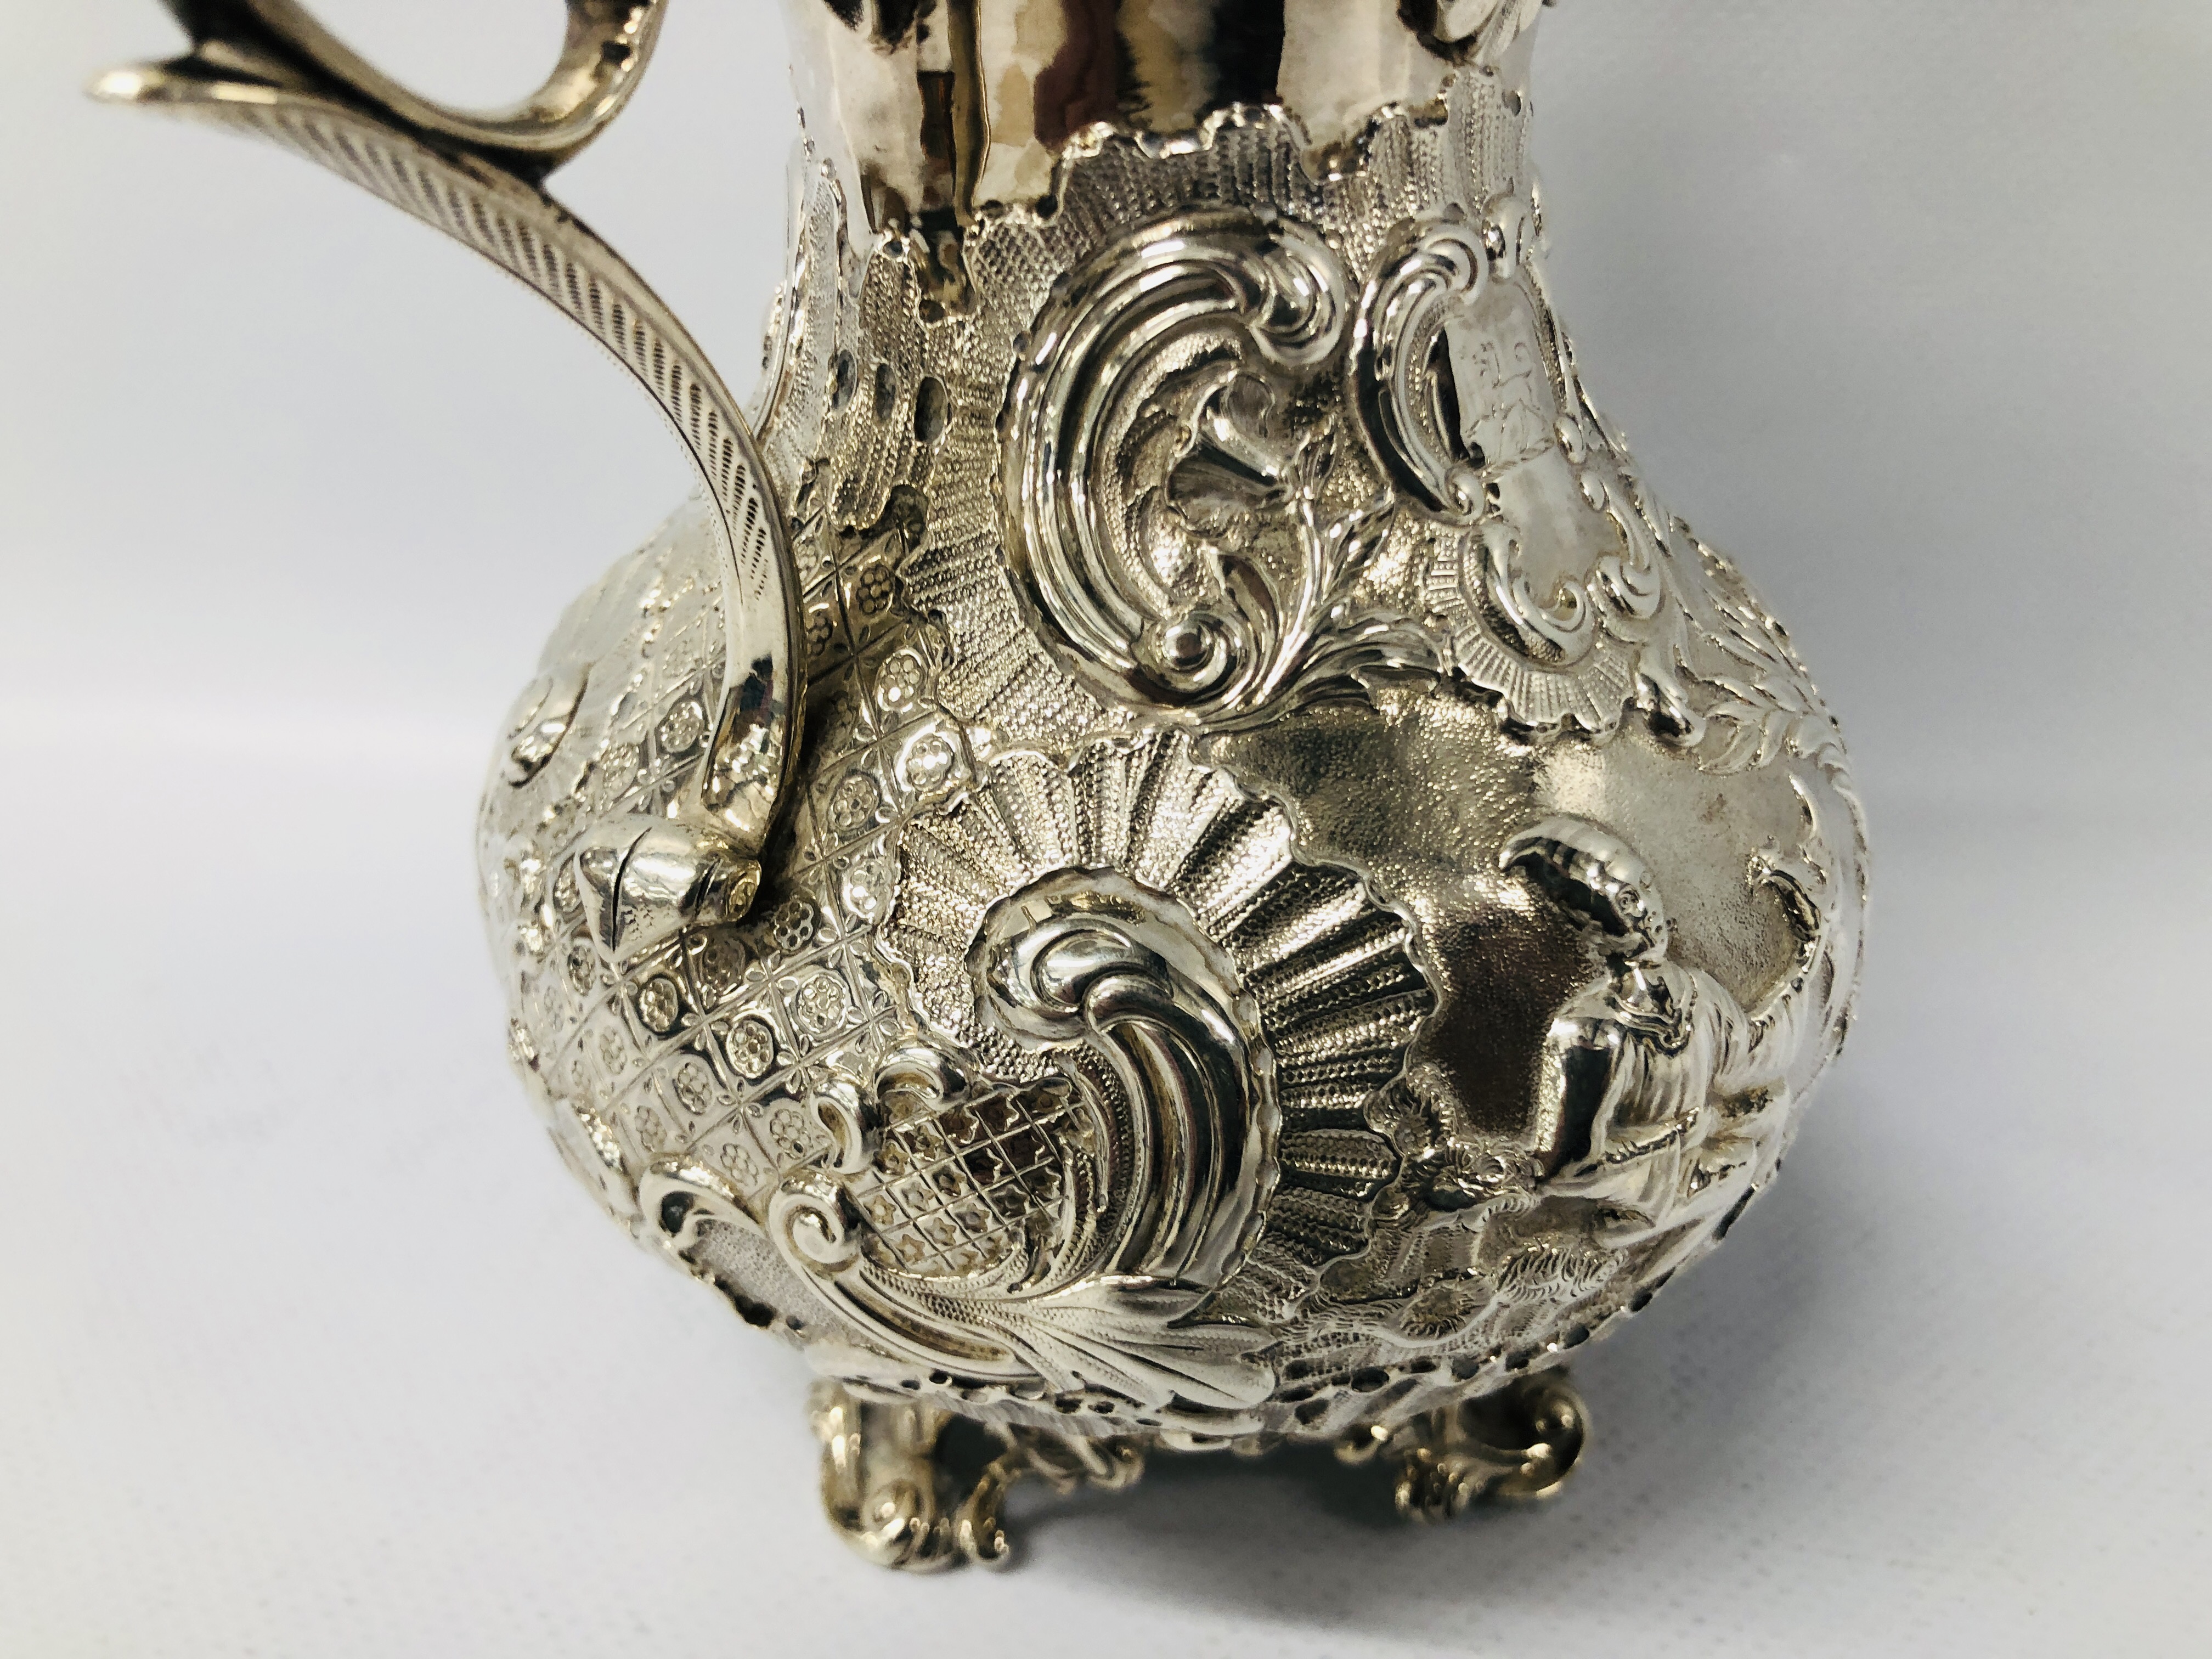 A SILVER MILK JUG OF ROCOCO DESIGN DECORATED WITH CHINOISERIE FIGURES WITH INSCRIPTION MR AND MRS J. - Image 13 of 25